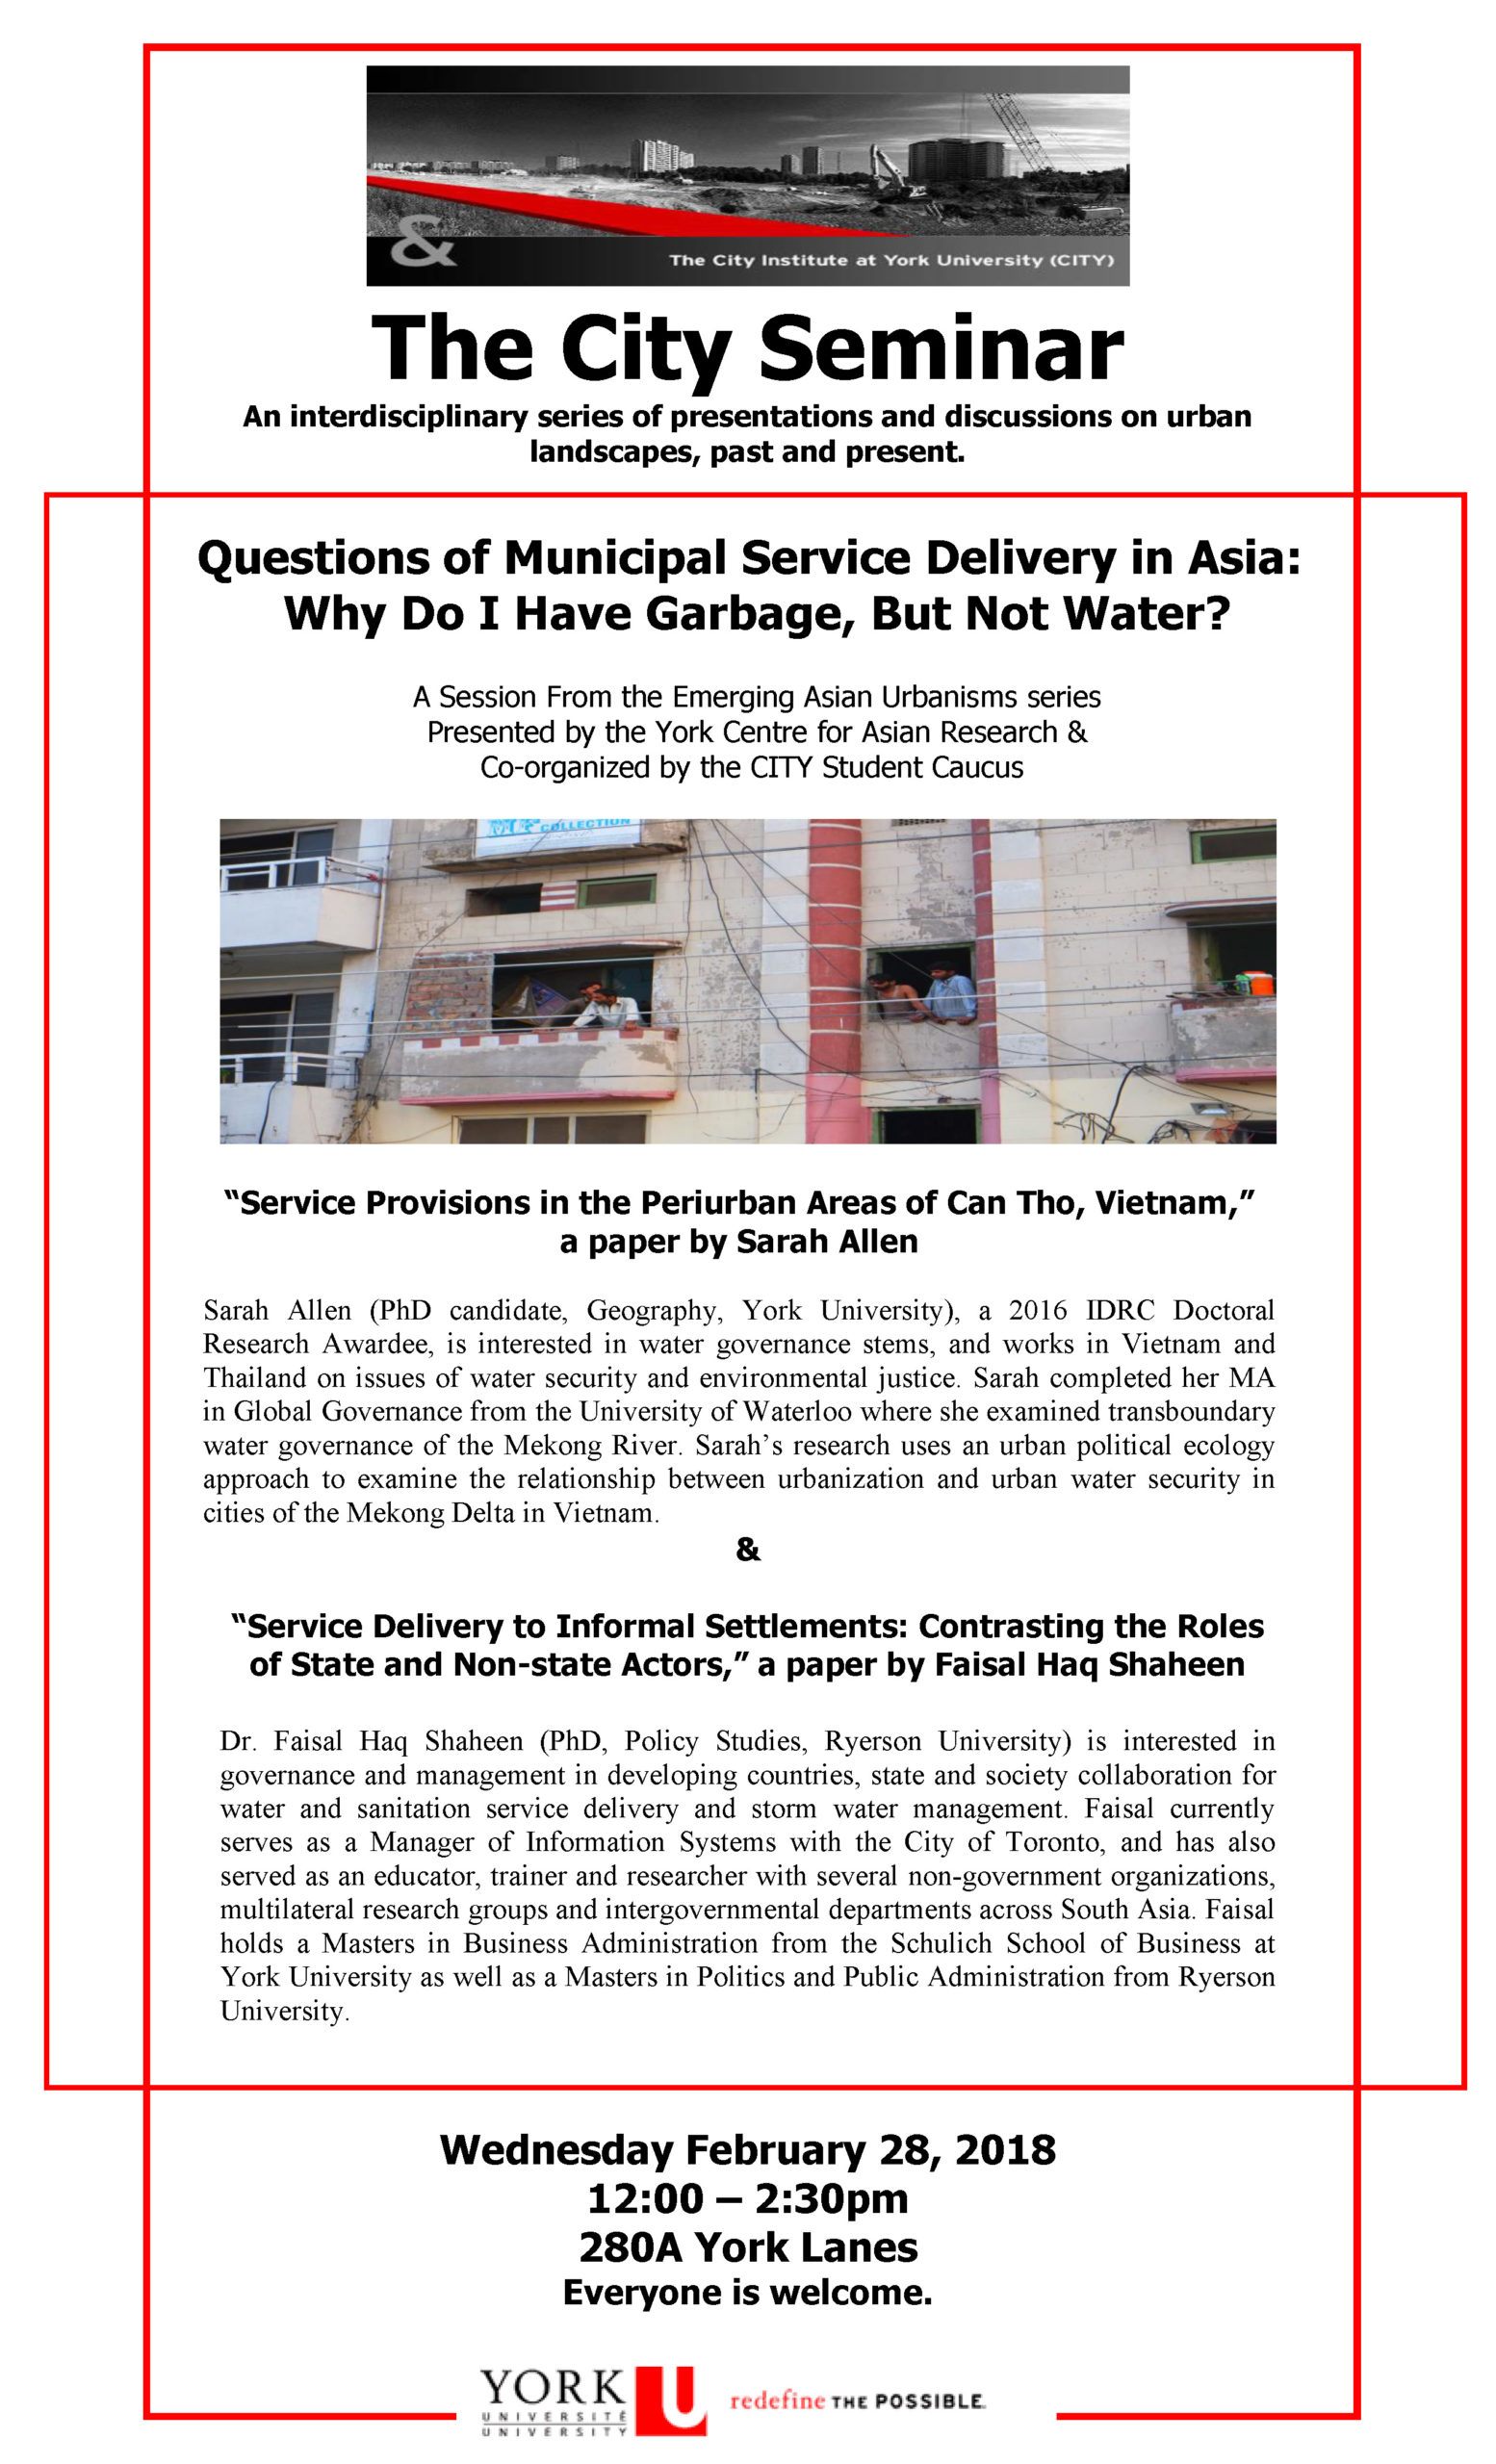 City seminar poster for "Questions of Municipal Service Delivery in Asia" Why Do I Have Garbage, But Not Water?"